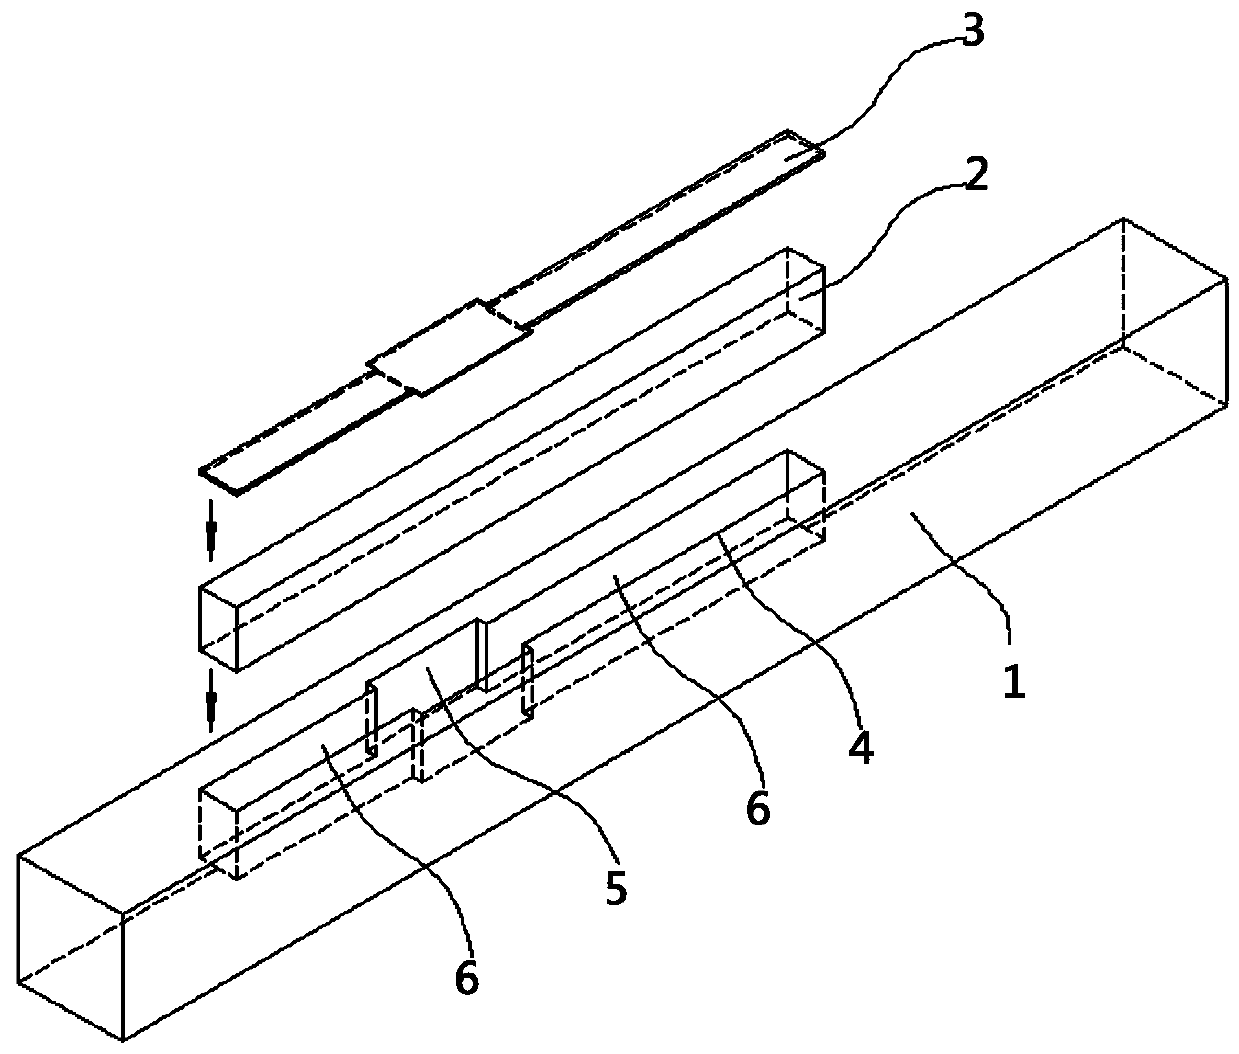 Composite and high-conductivity cathode steel bar